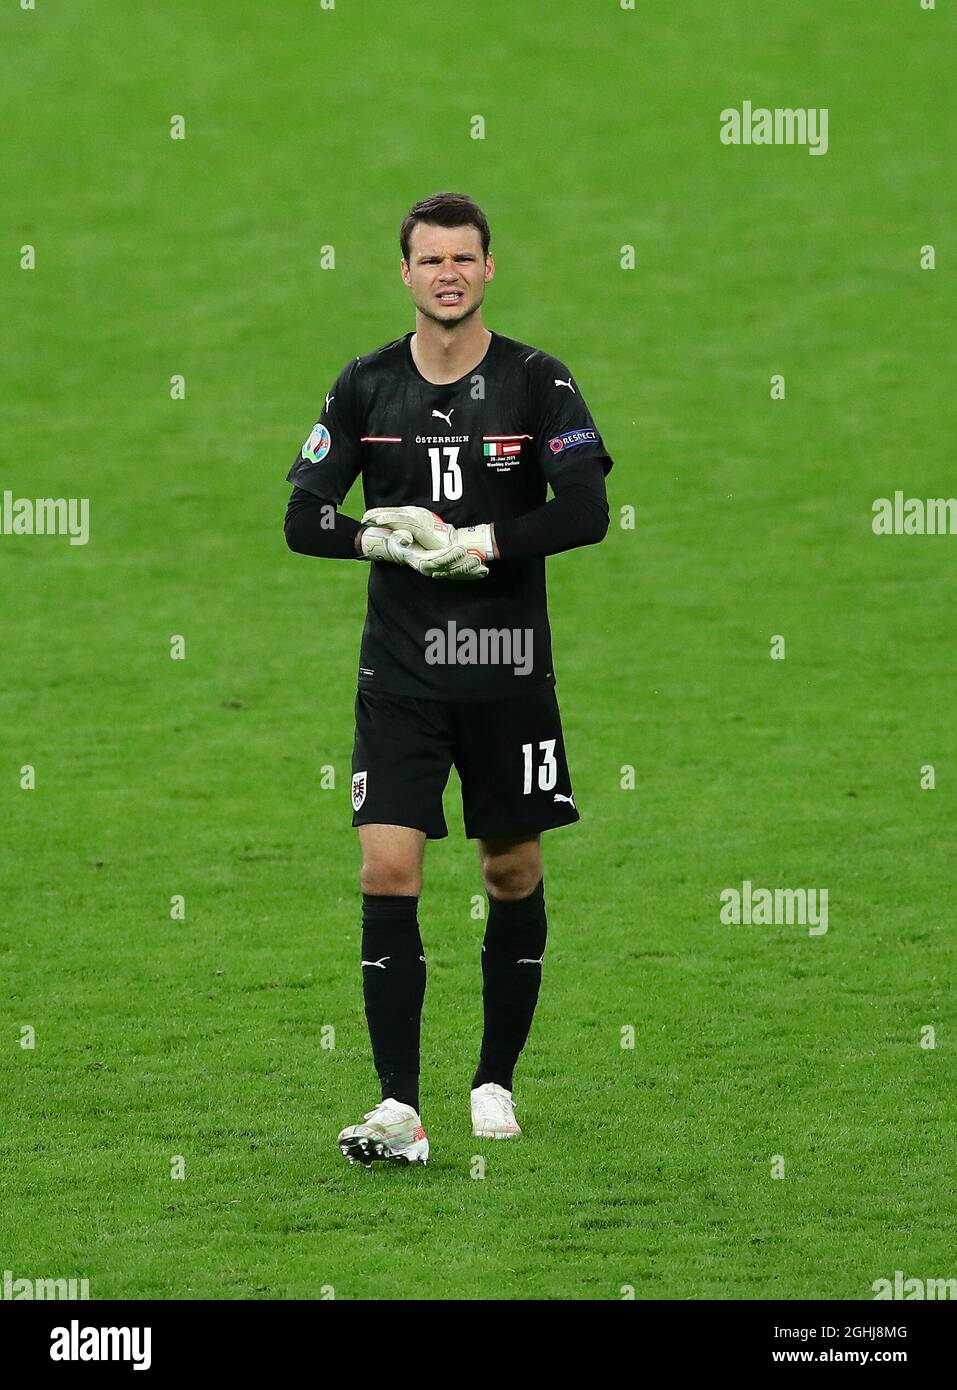 London, England, 26th June 2021. Daniel Bachmann of Austria during the UEFA European Championships match at Wembley Stadium, London. Picture credit should read: David Klein / Sportimage via PA Images Stock Photo